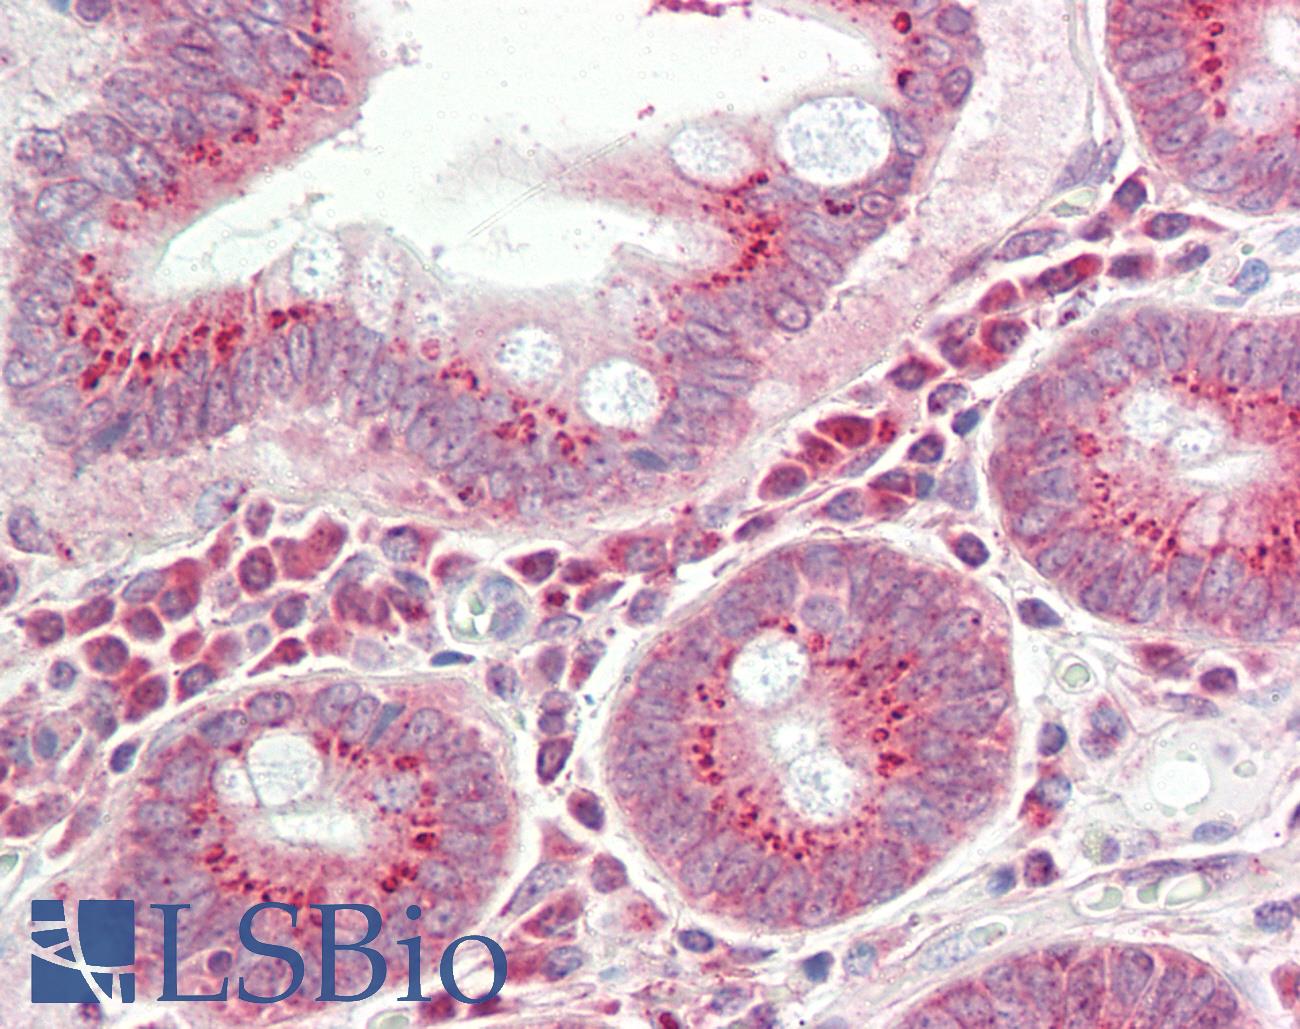 RPS12 / Ribosomal Protein S12 Antibody - Anti-RPS12 / S12 antibody IHC staining of human small intestine. Immunohistochemistry of formalin-fixed, paraffin-embedded tissue after heat-induced antigen retrieval.